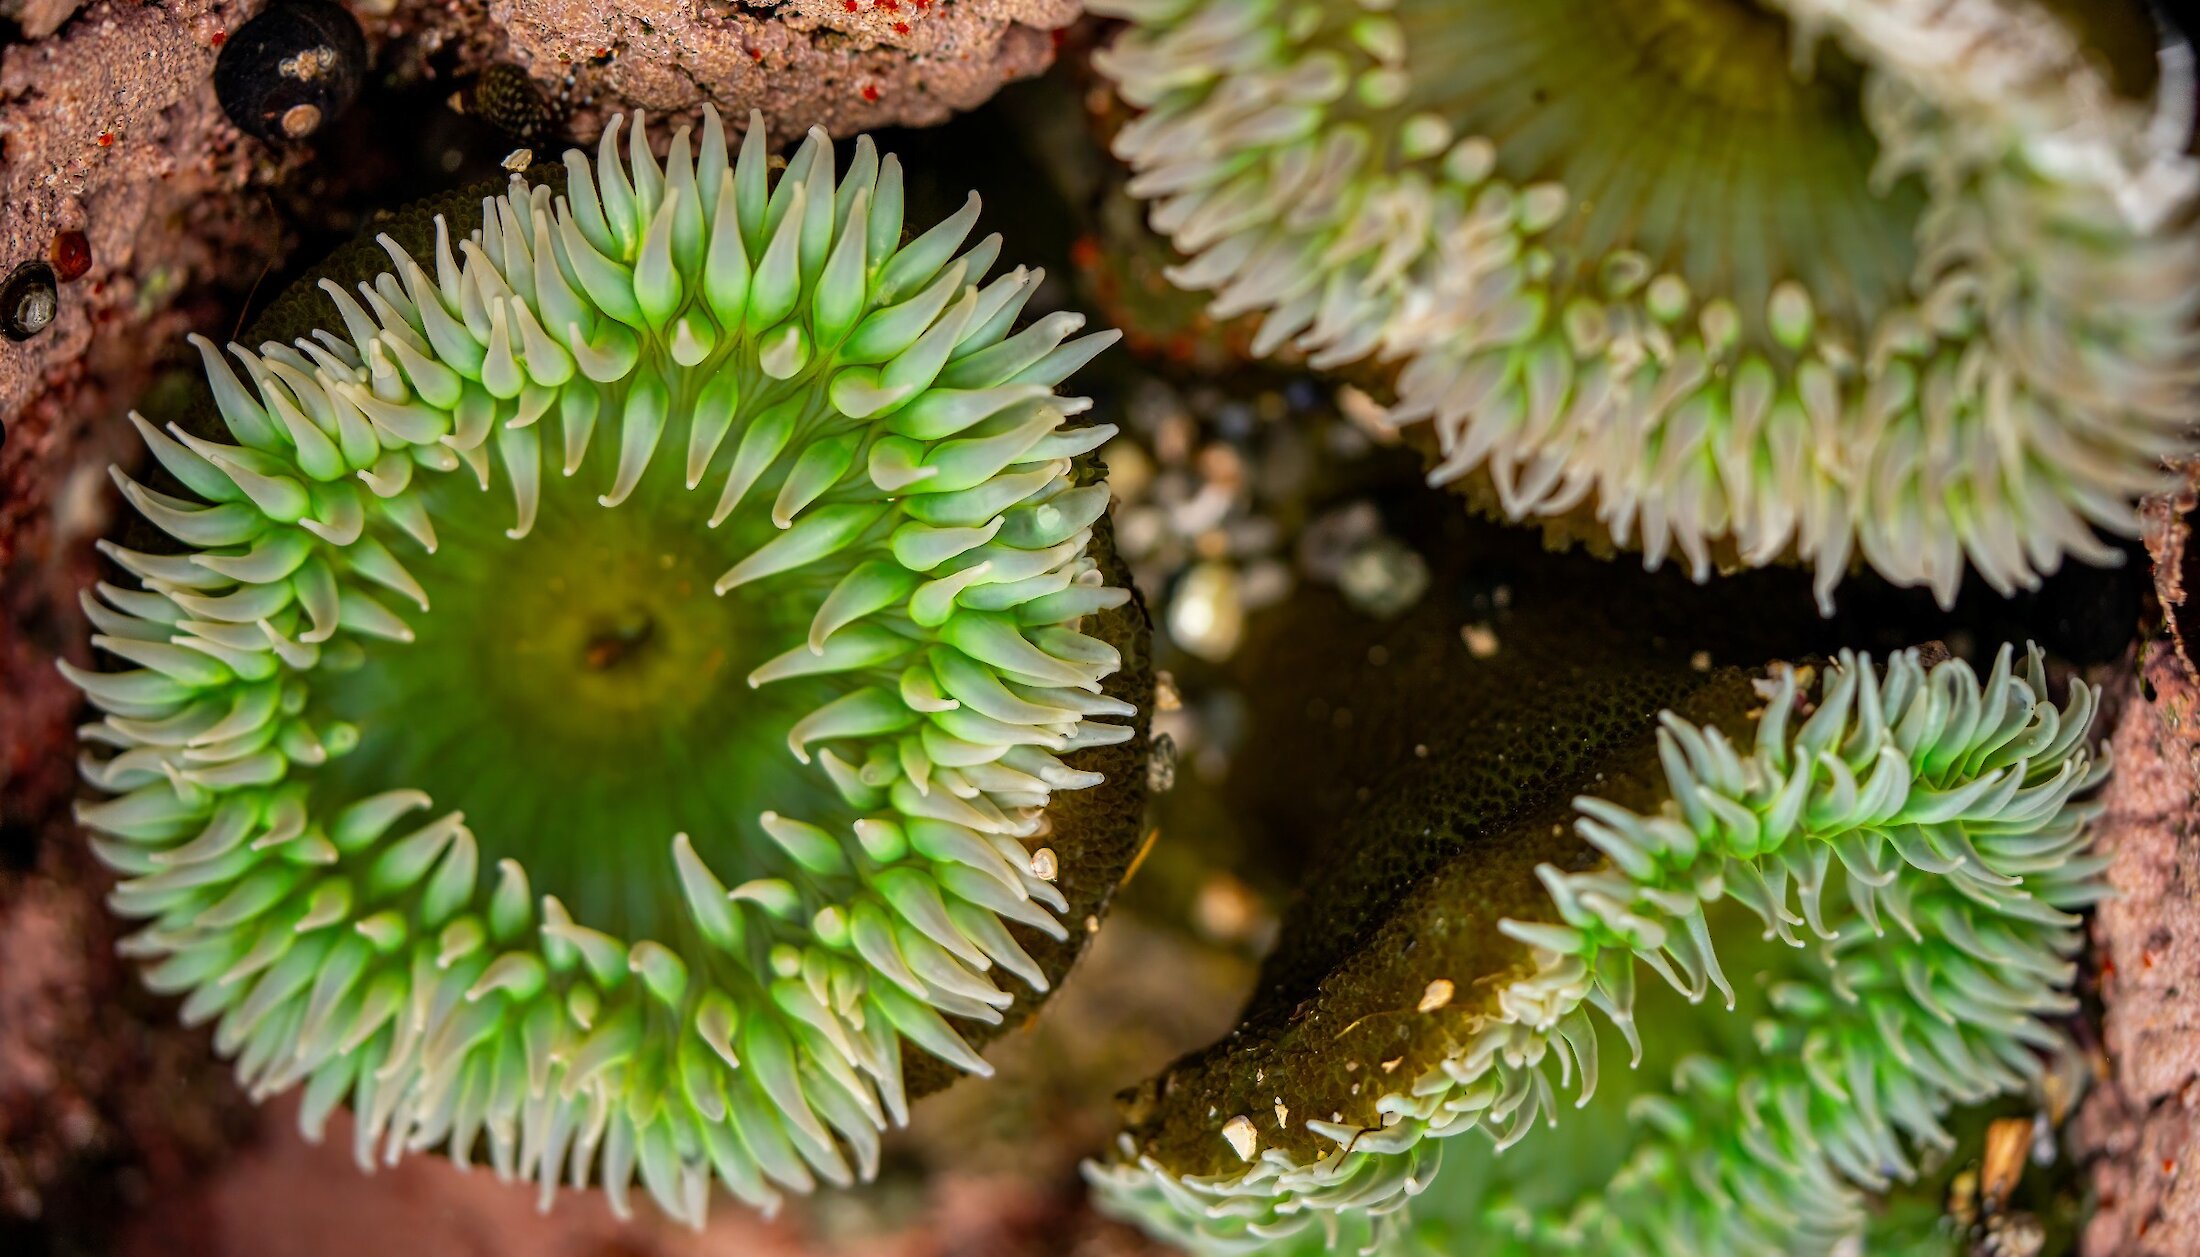 Grouping of three green sea anemones in a tide pool